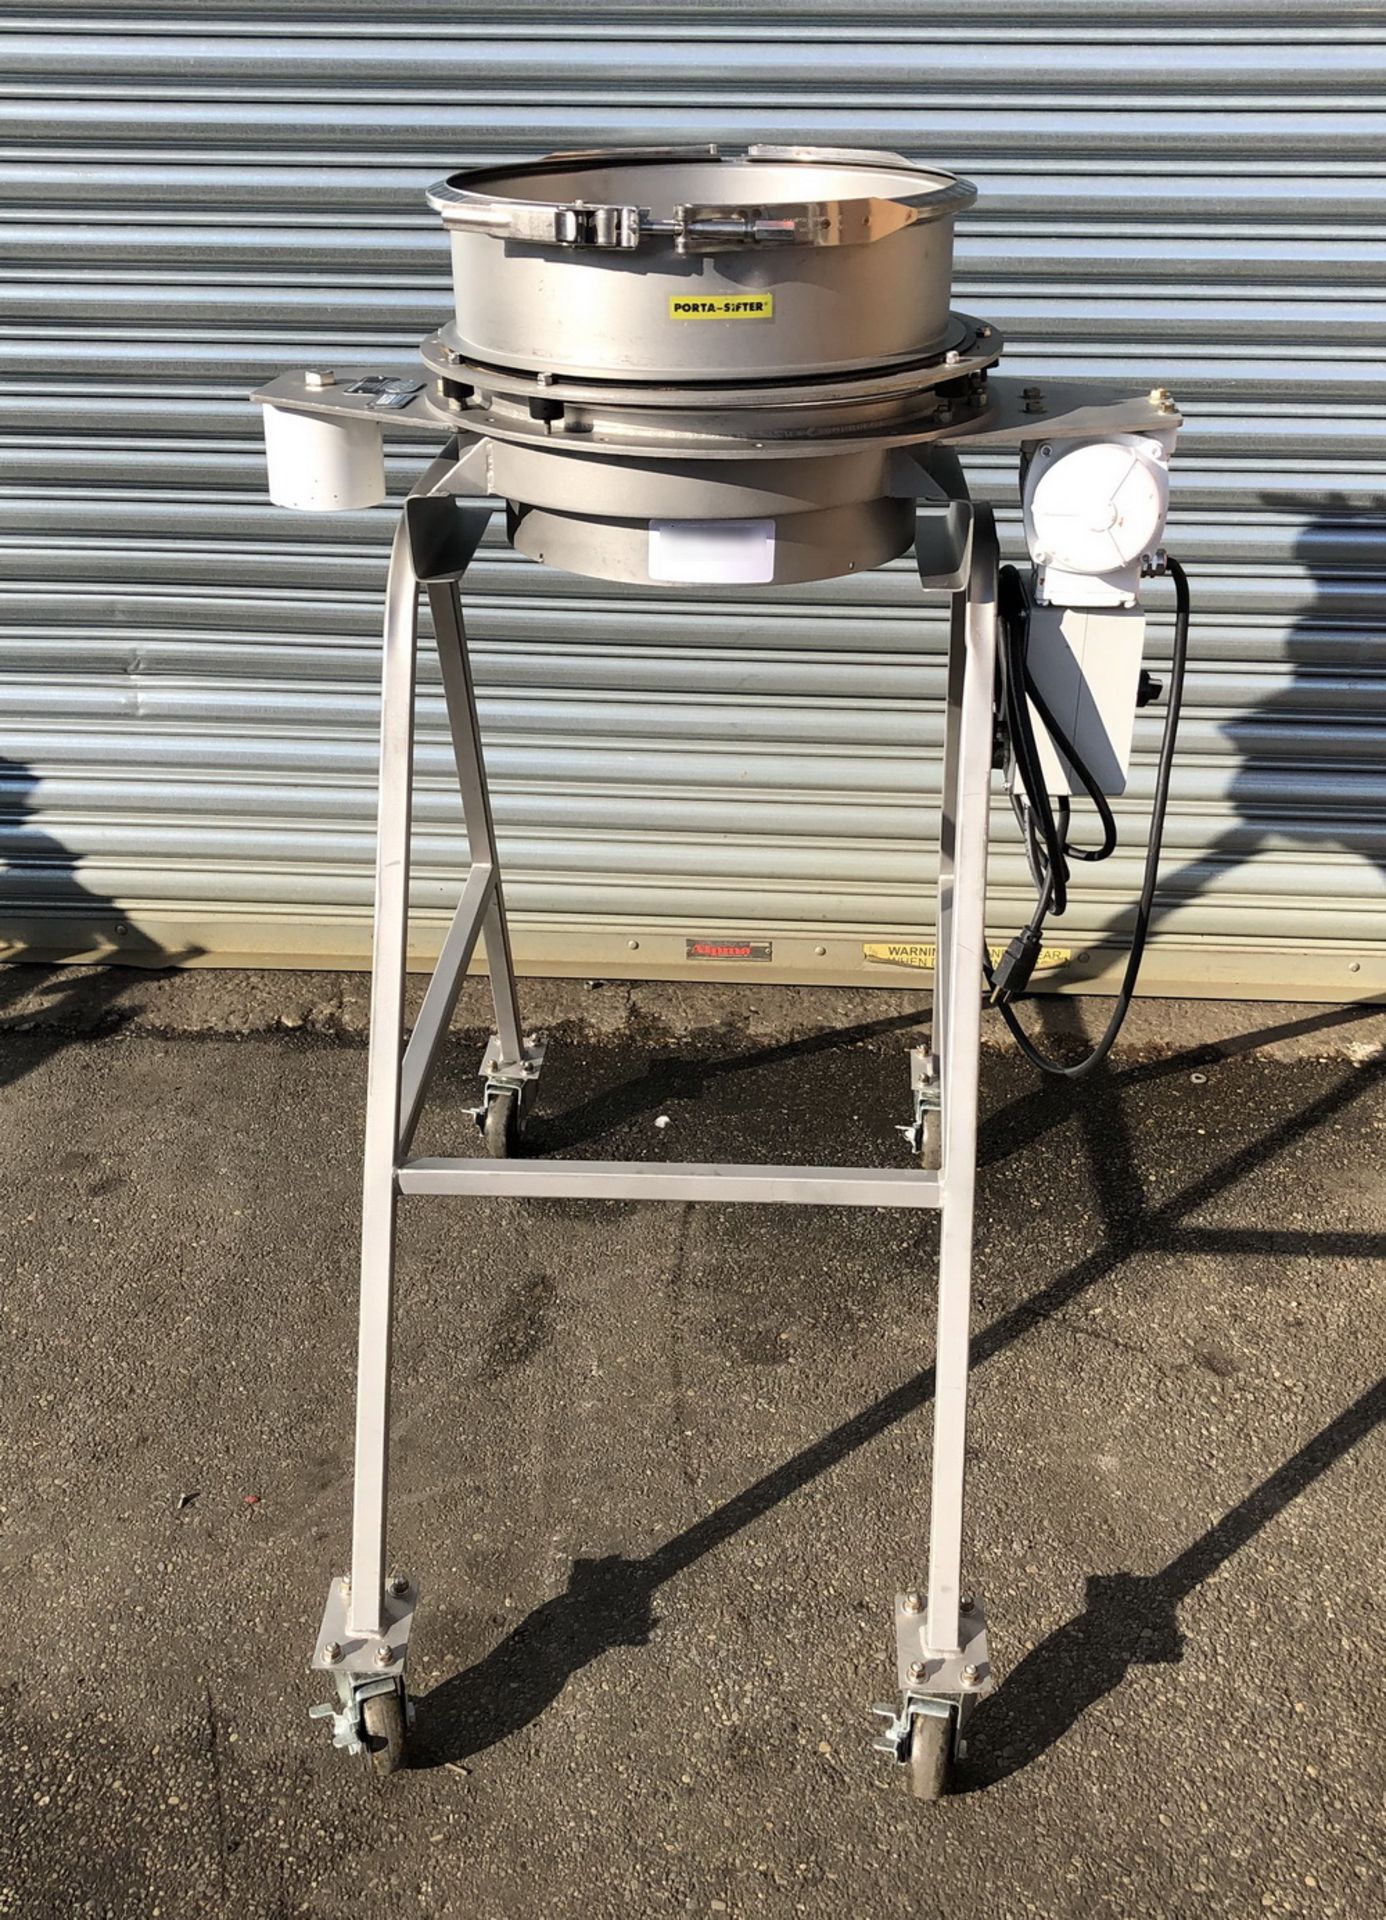 Midwestern Industries Stainless steel 16” Porta Sifter, S/N 0207-5772. Portable base, single deck